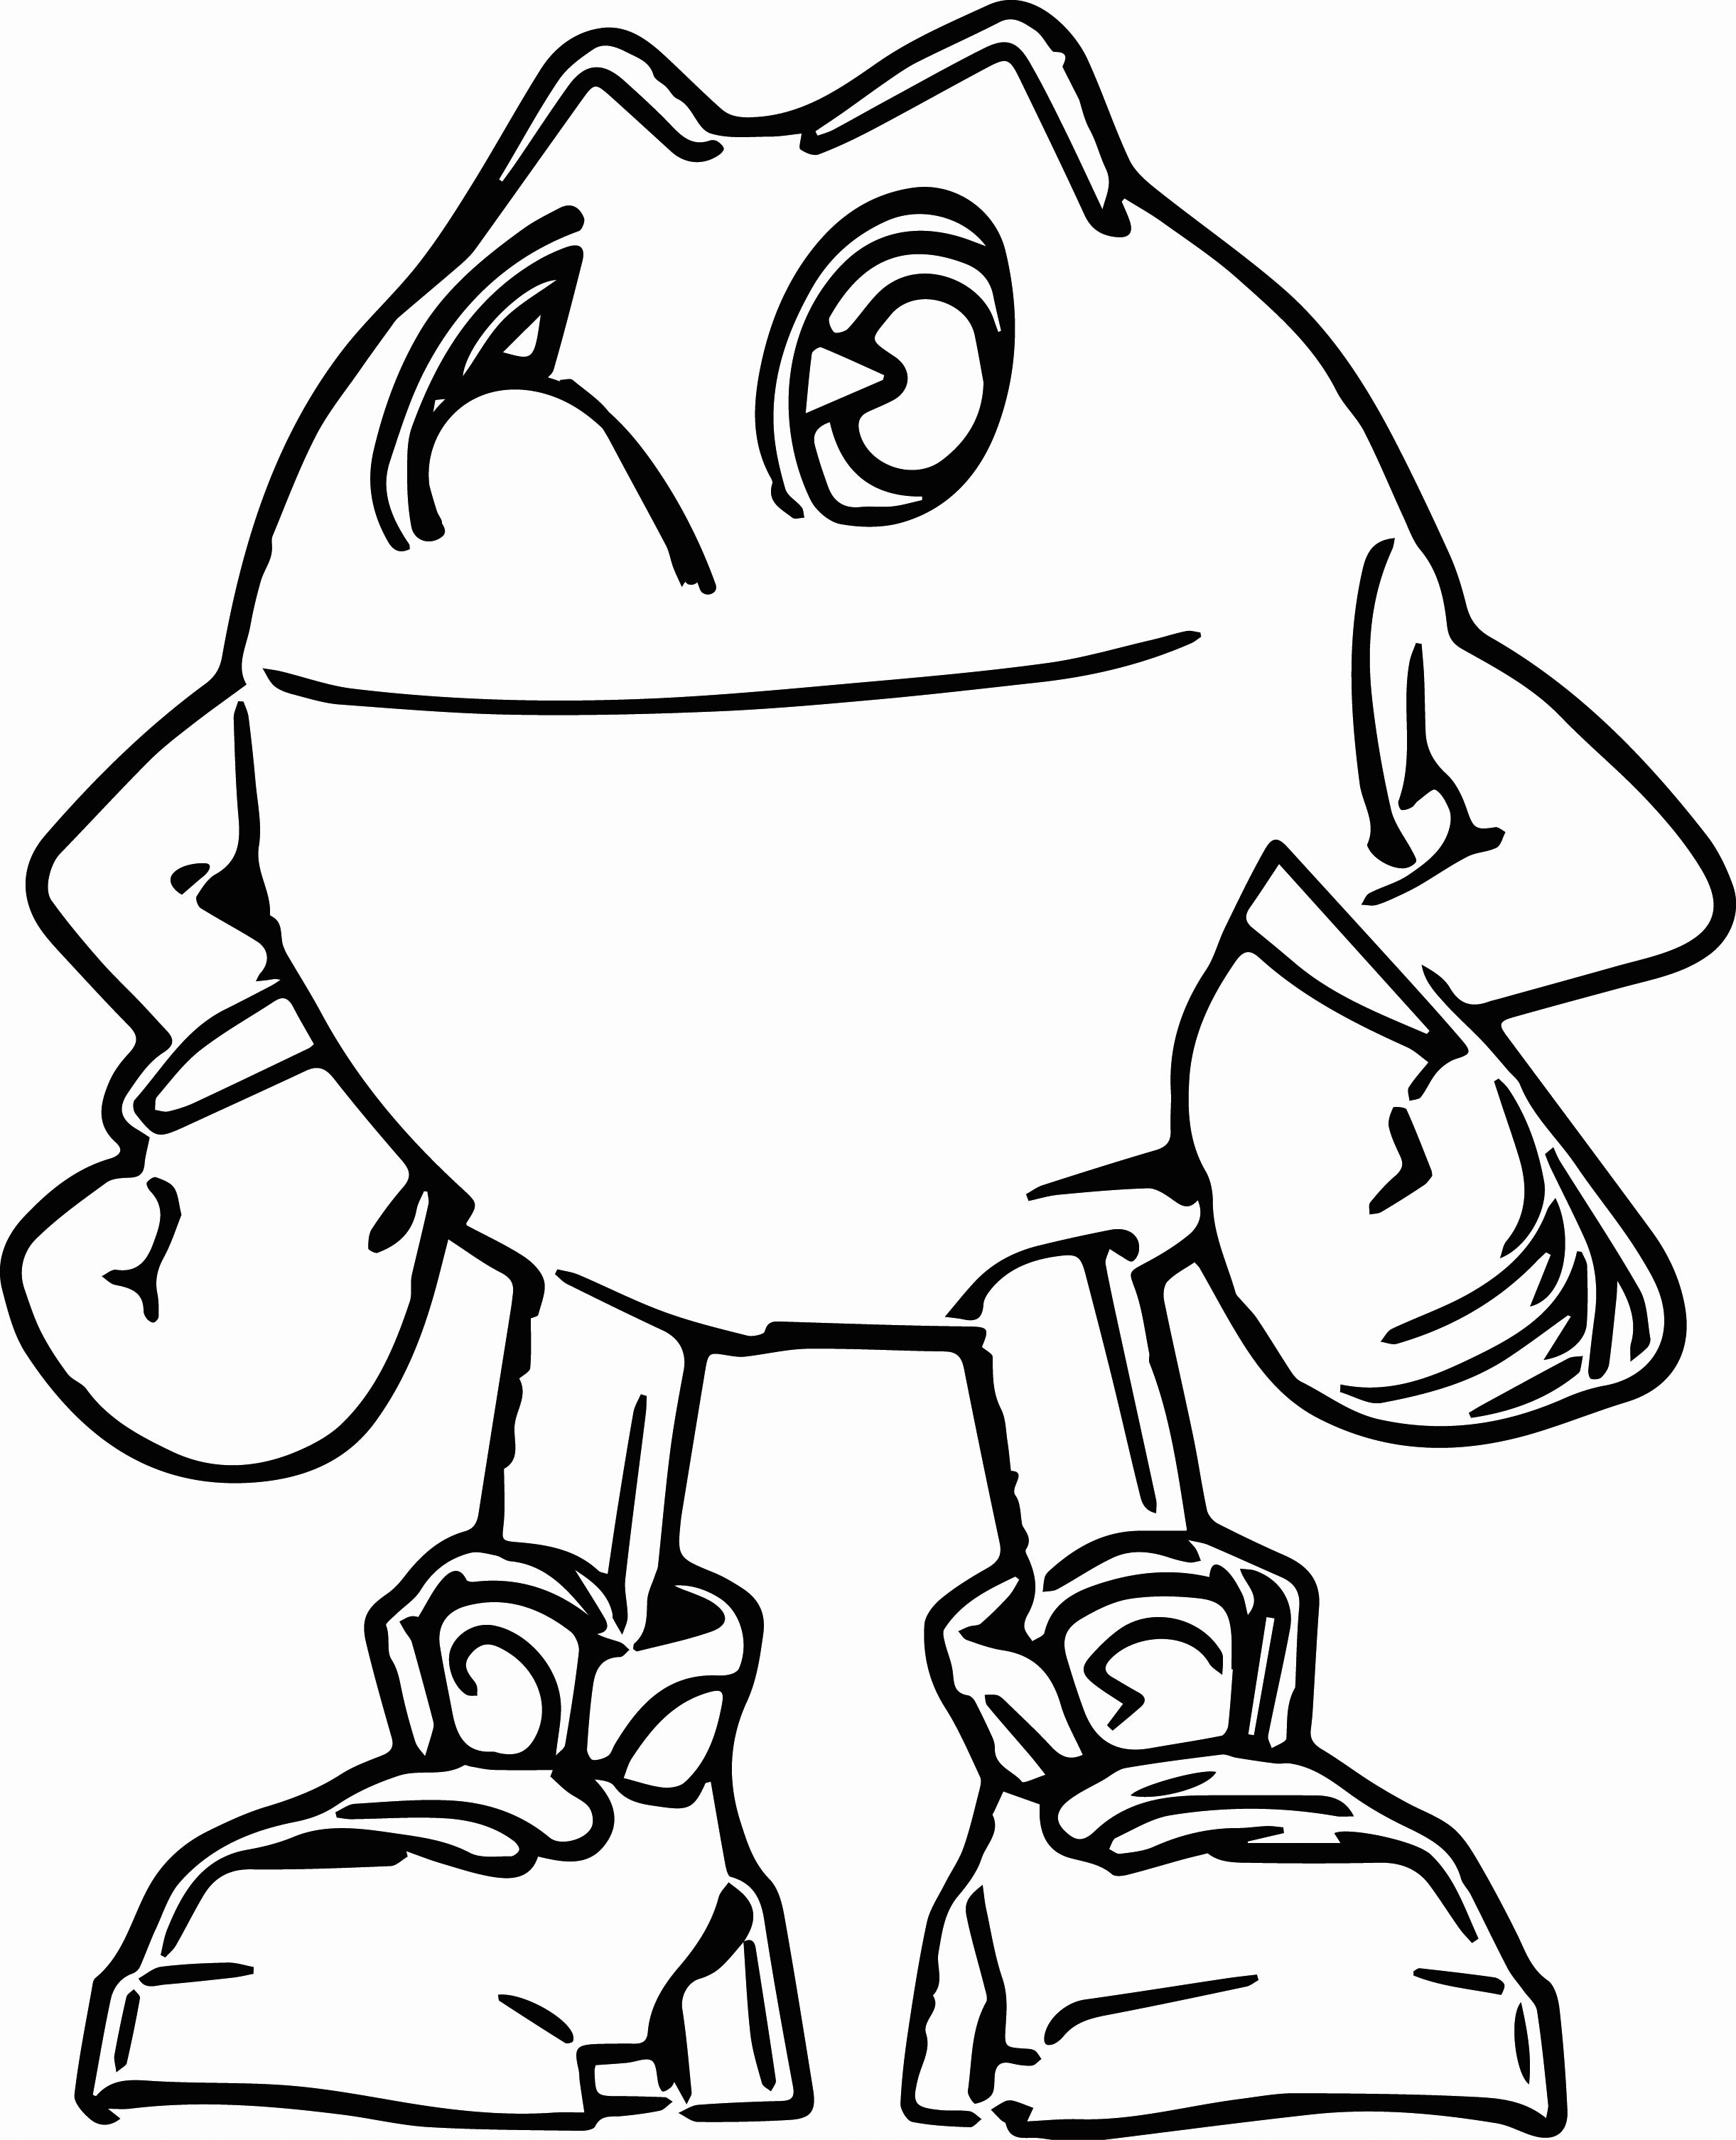 Pac-Man Coloring Pages.